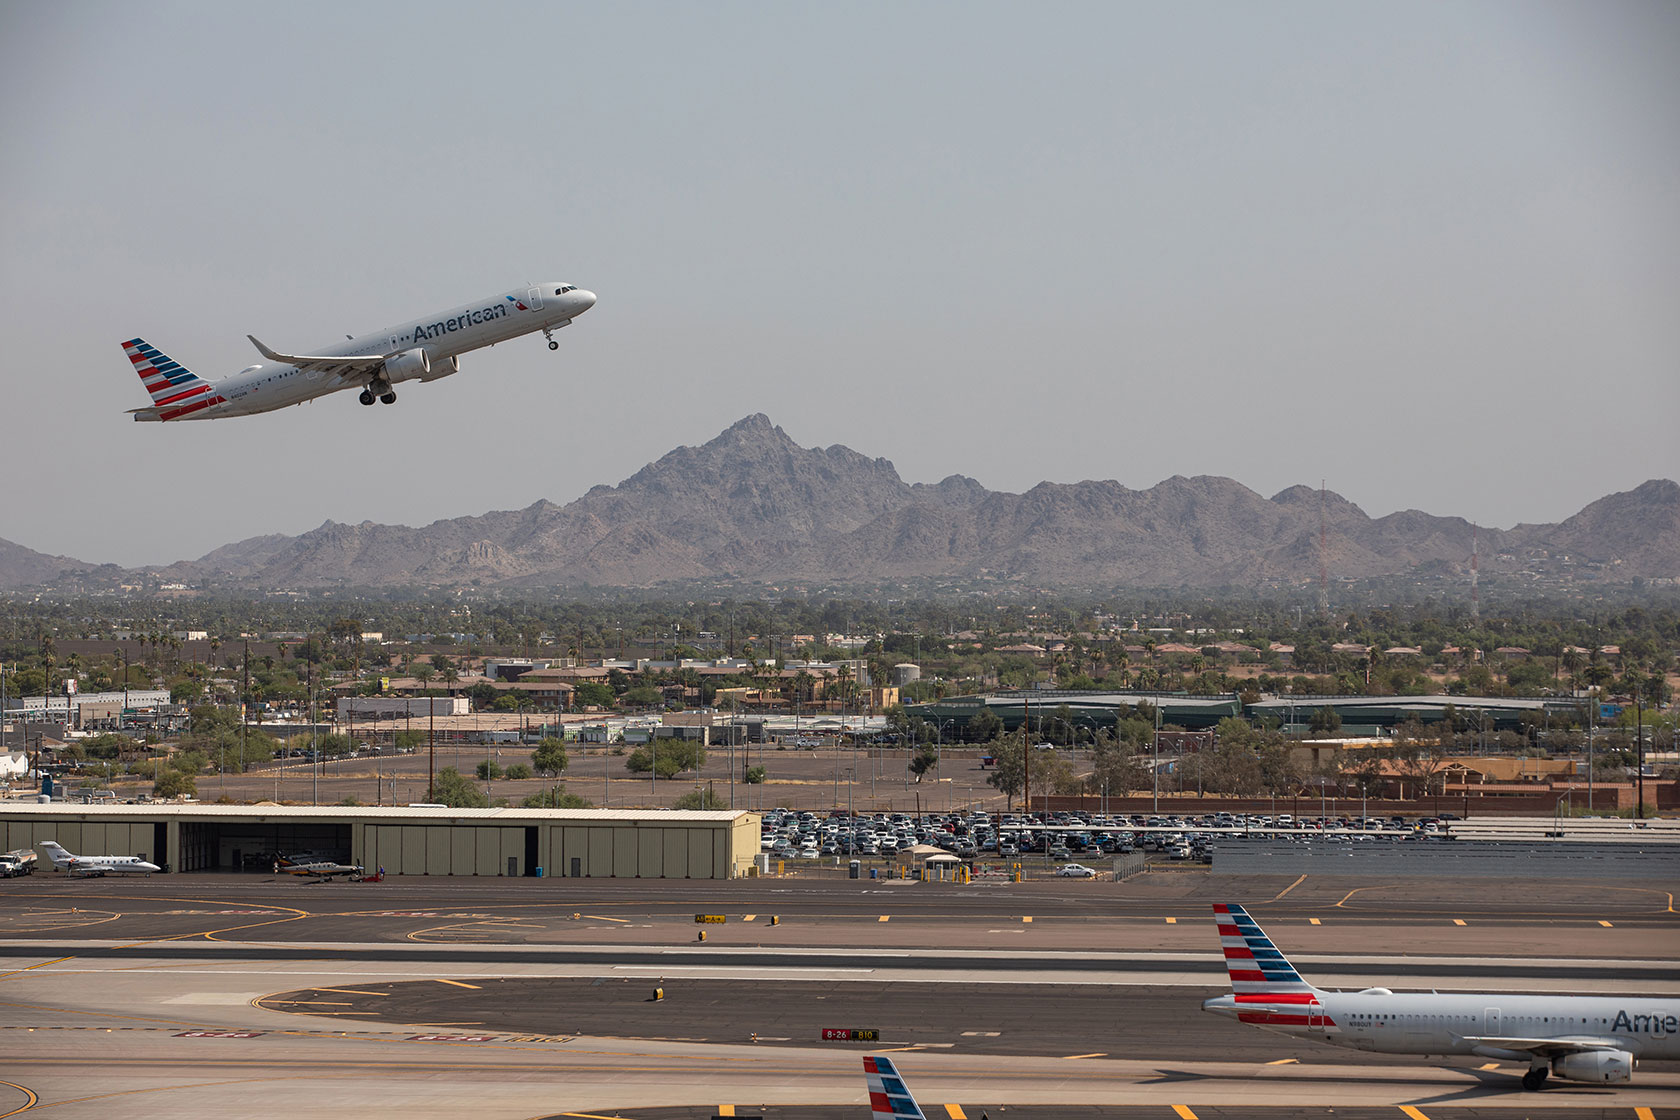 Photo shows an American Airlines plane taking off against a dry mountain background